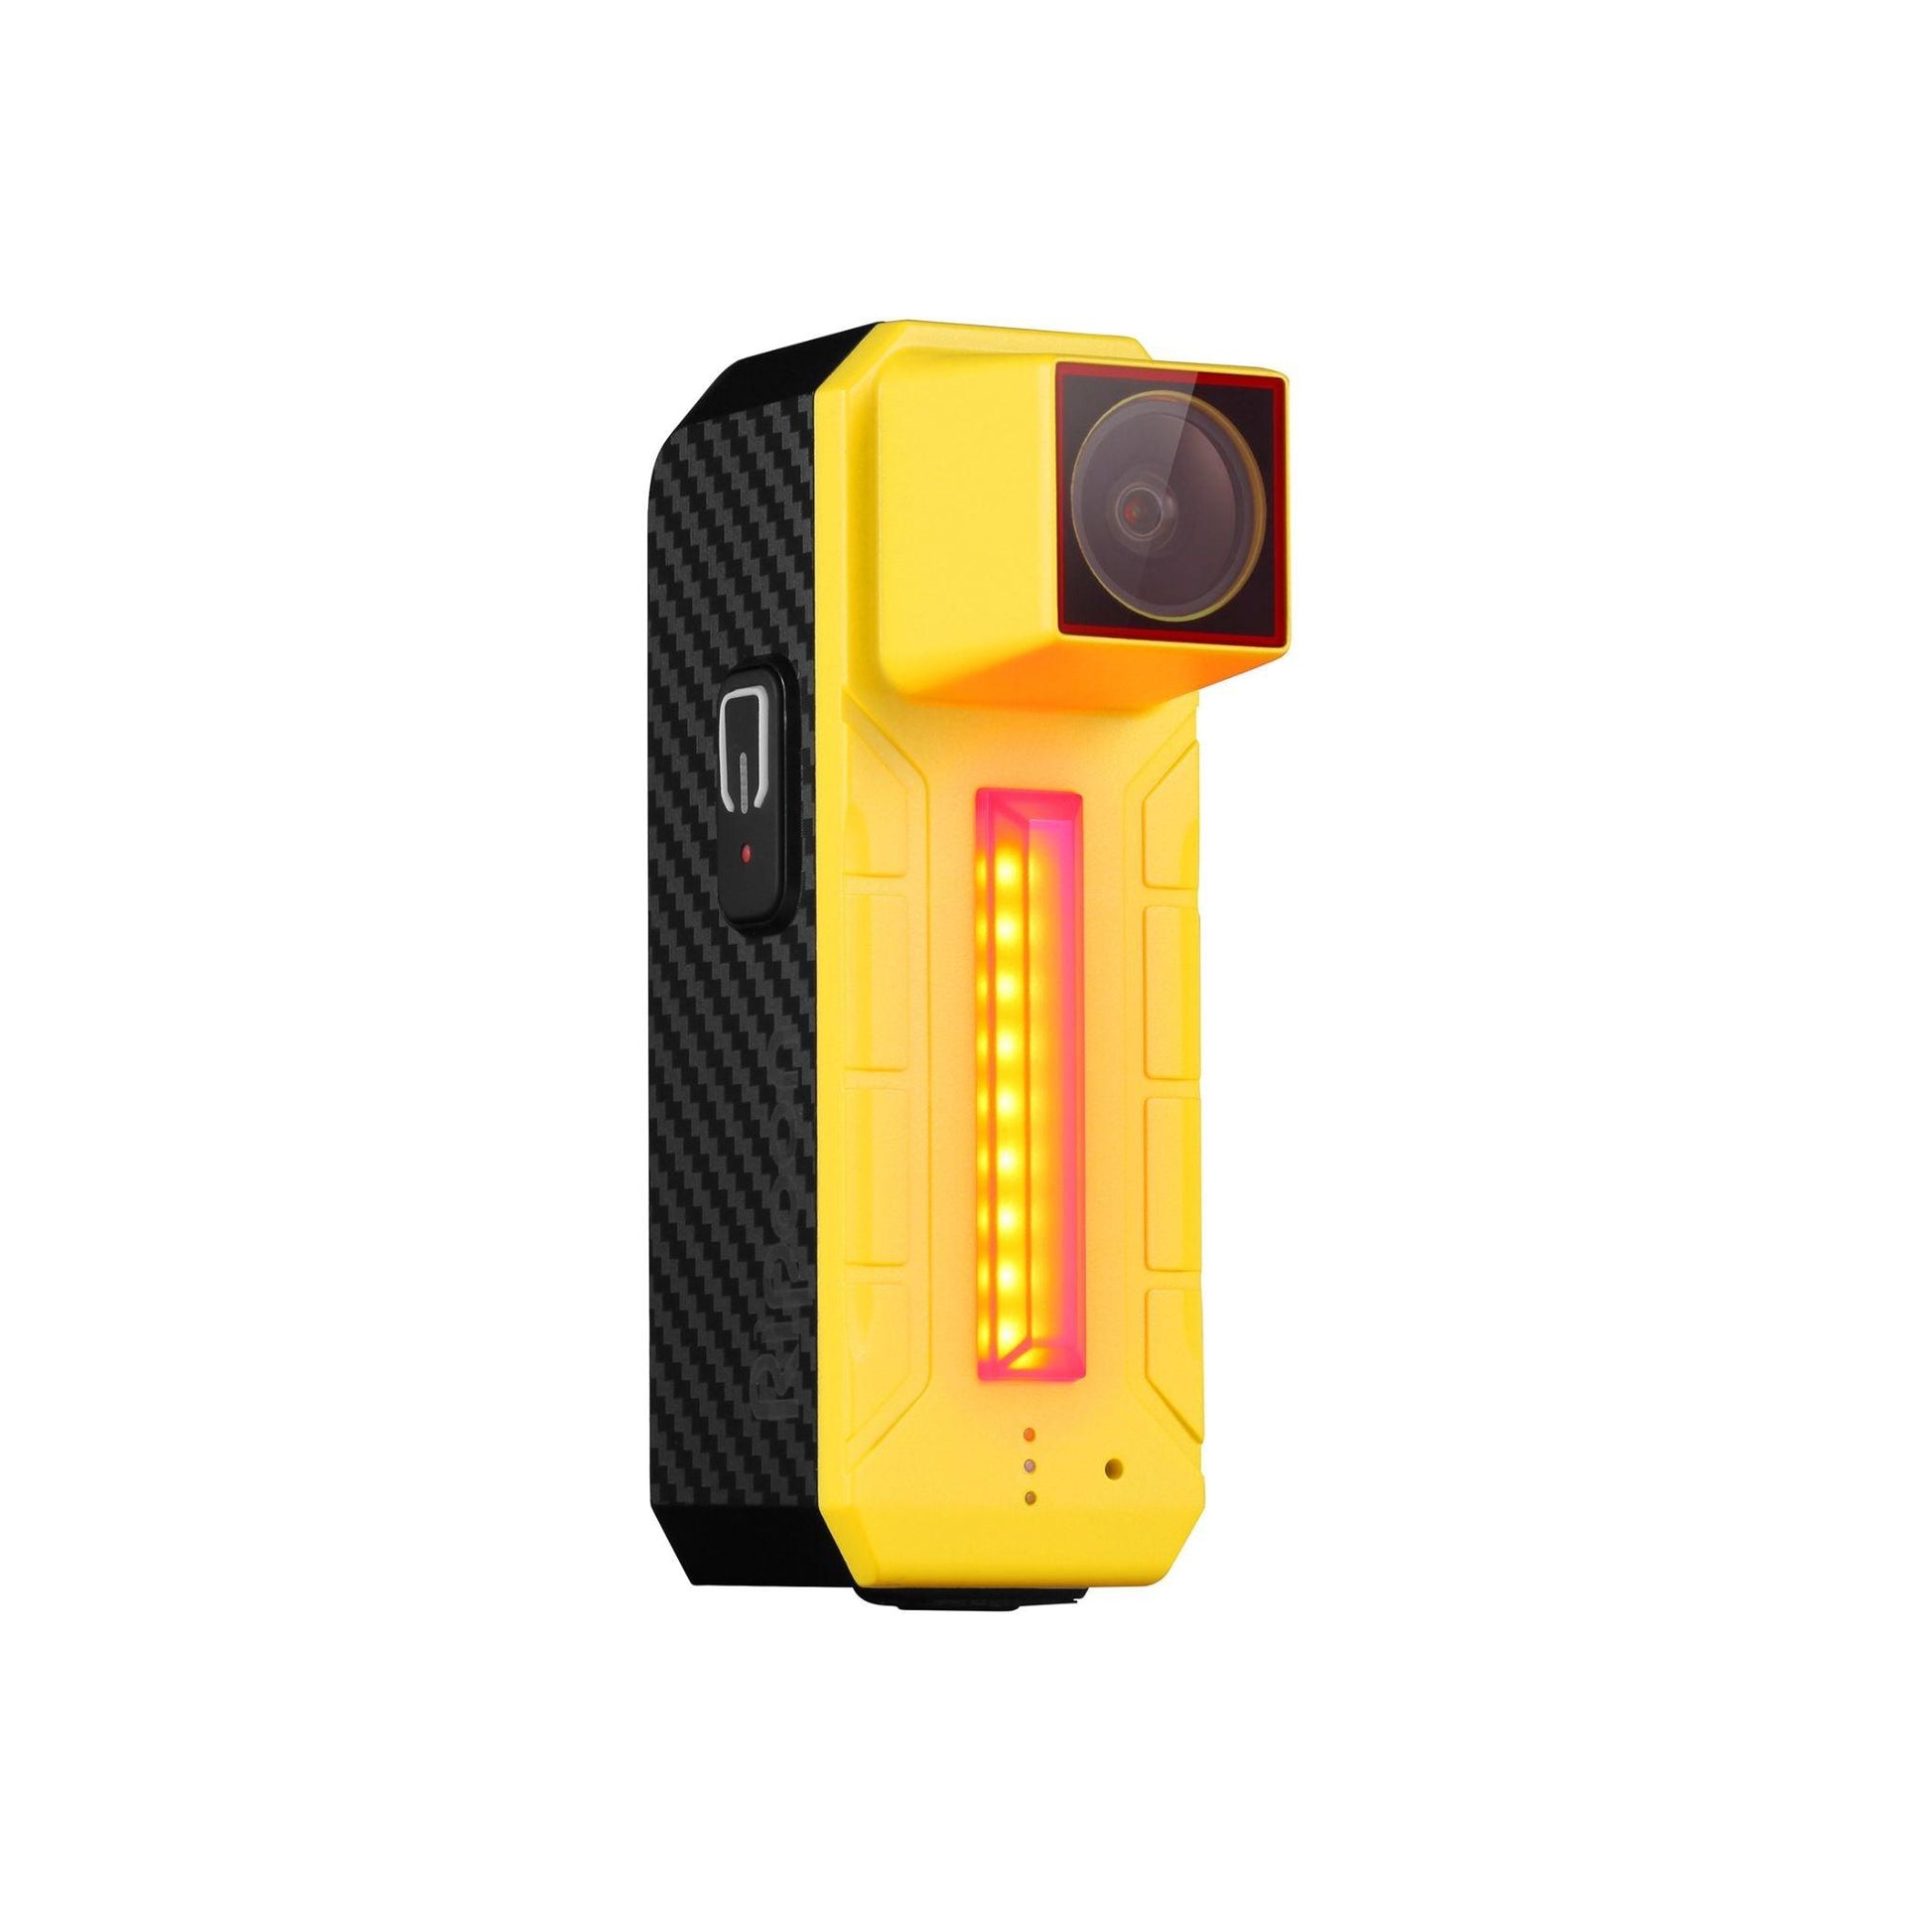 Ripoon Q100 Ultra HD Bicycle Dash Cam Tail Light,CMOS/DSP,140°FOV f1.5,  100-lumen LED,9 Hours Continuous Loop-Recording,Ambient Light Detective and